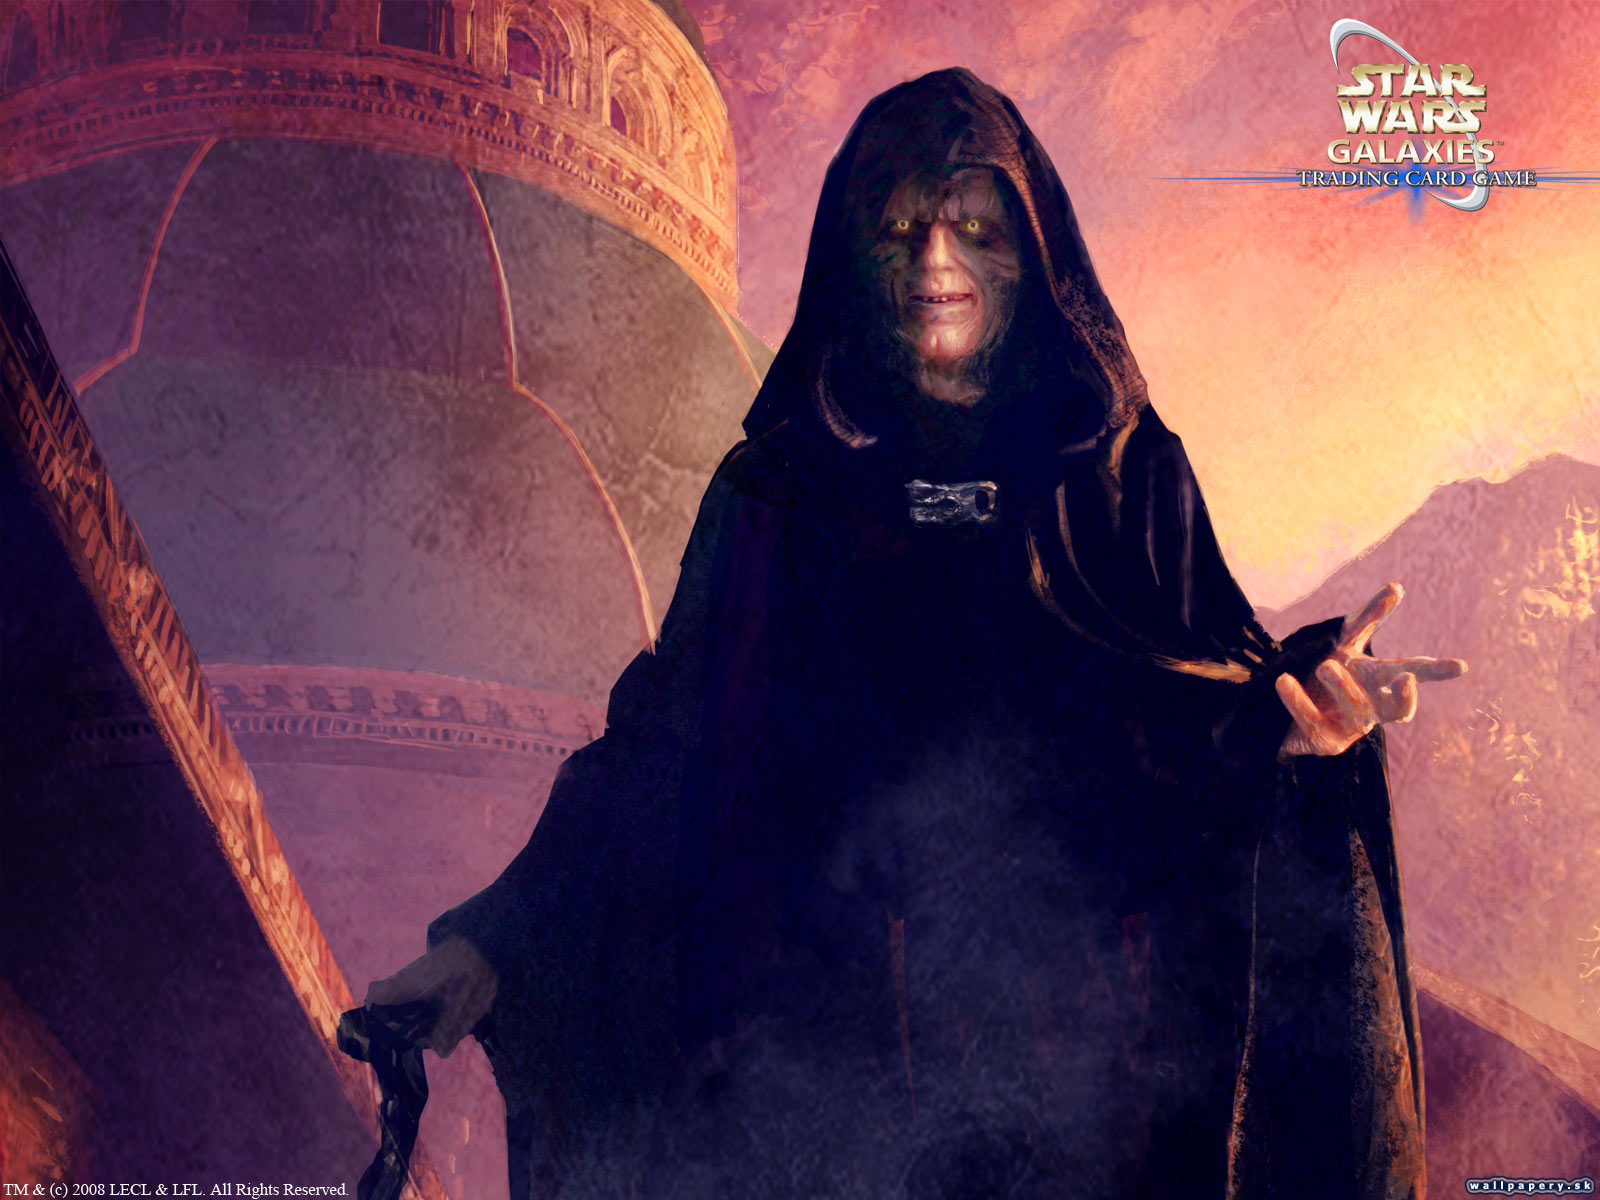 Star Wars Galaxies - Trading Card Game: Champions of the Force - wallpaper 23